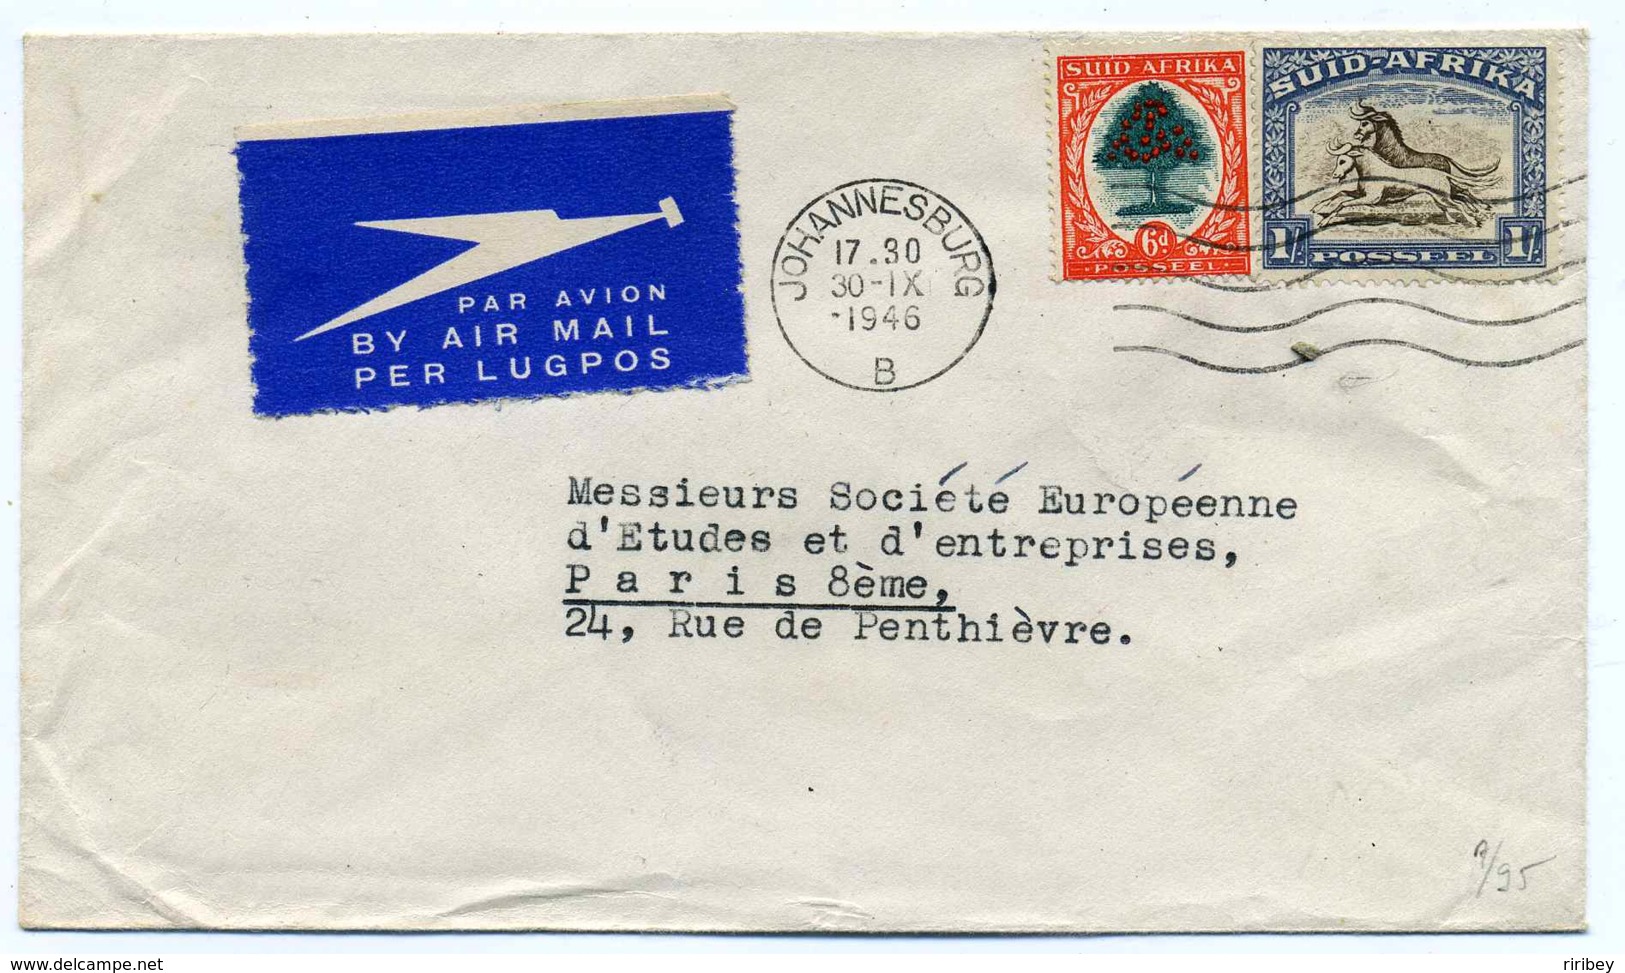 AIR MAIL COVER / JOHANNESBURG - SUID AFRICA / 1946 / To France - Airmail